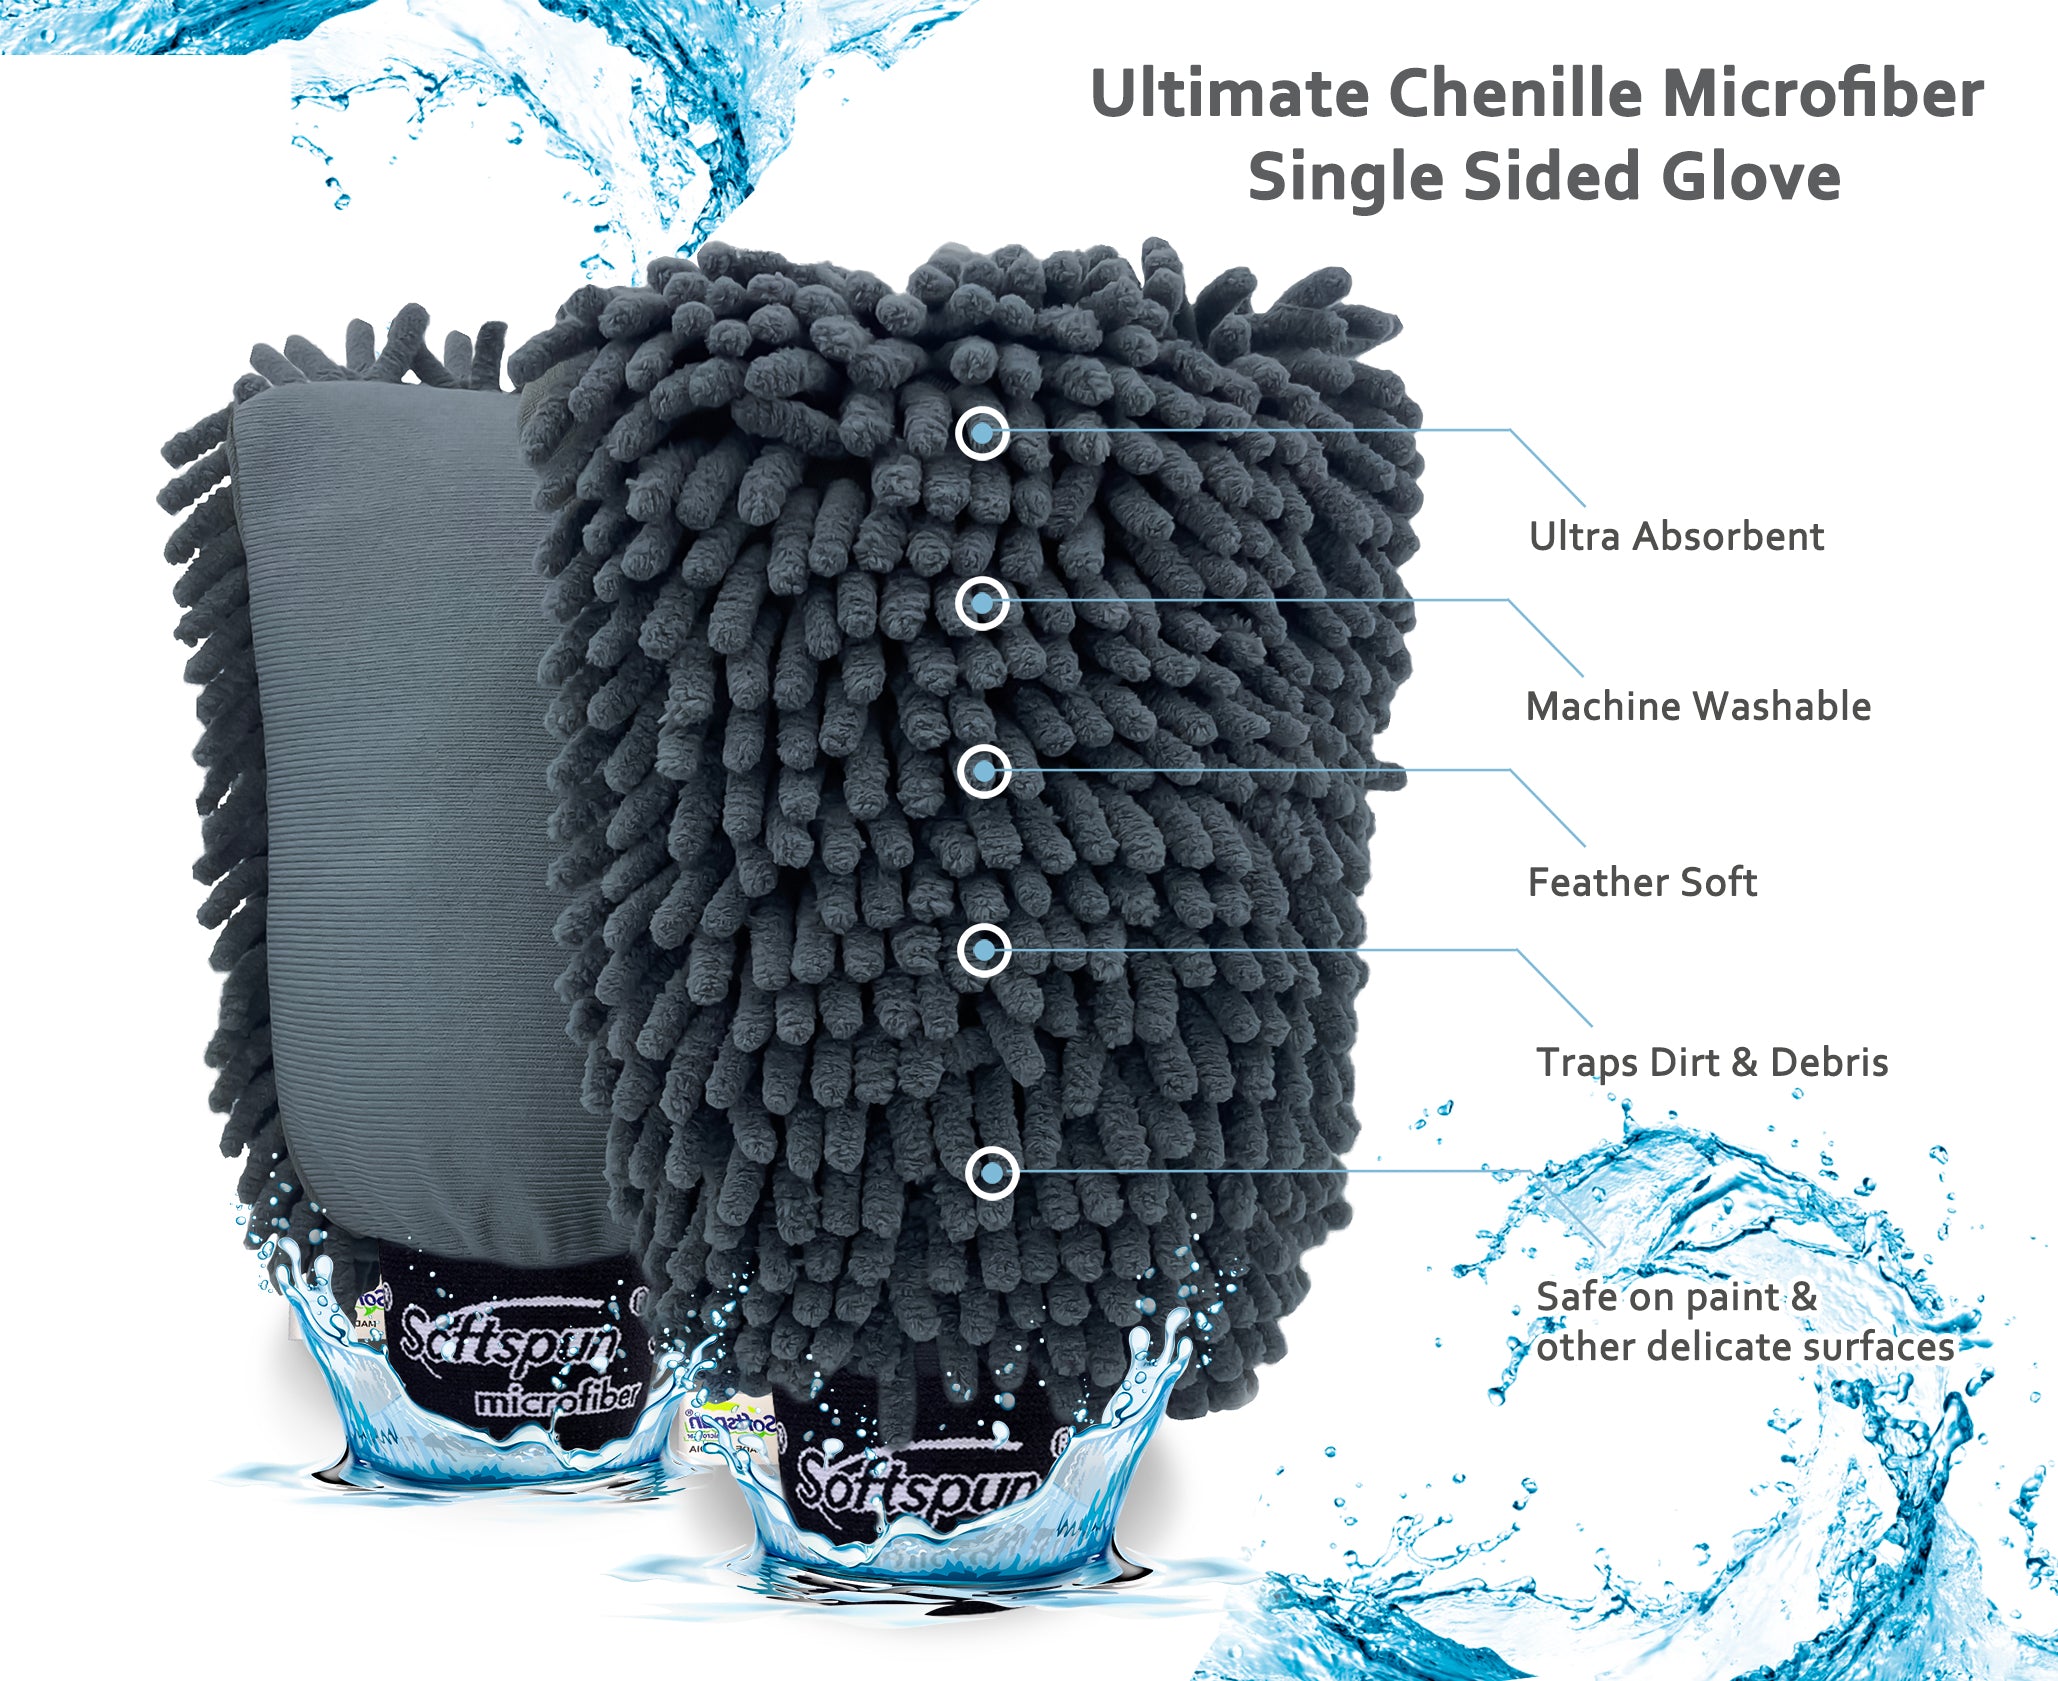 SOFTSPUN Microfiber Chenille & Glass Cloth Mitt,  2 Piece Combo 1700 GSM, Multi-Purpose Super Absorbent and Perfect Wash Clean with Lint-Scratch Free Home, Kitchen, Window, Dusting!